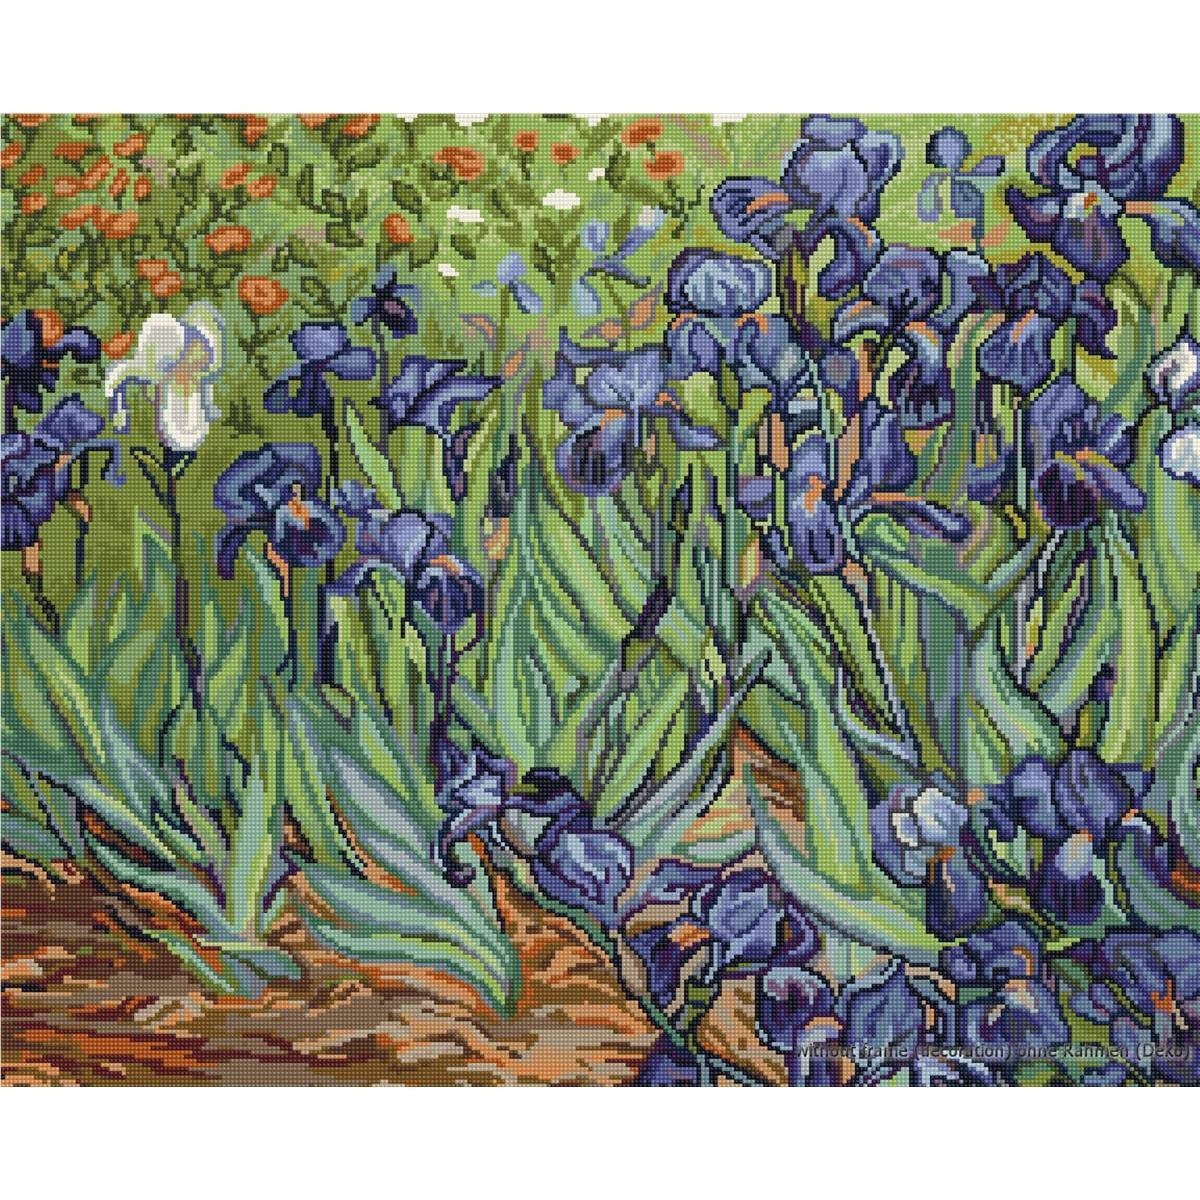 A detailed painting shows a garden full of bright purple...